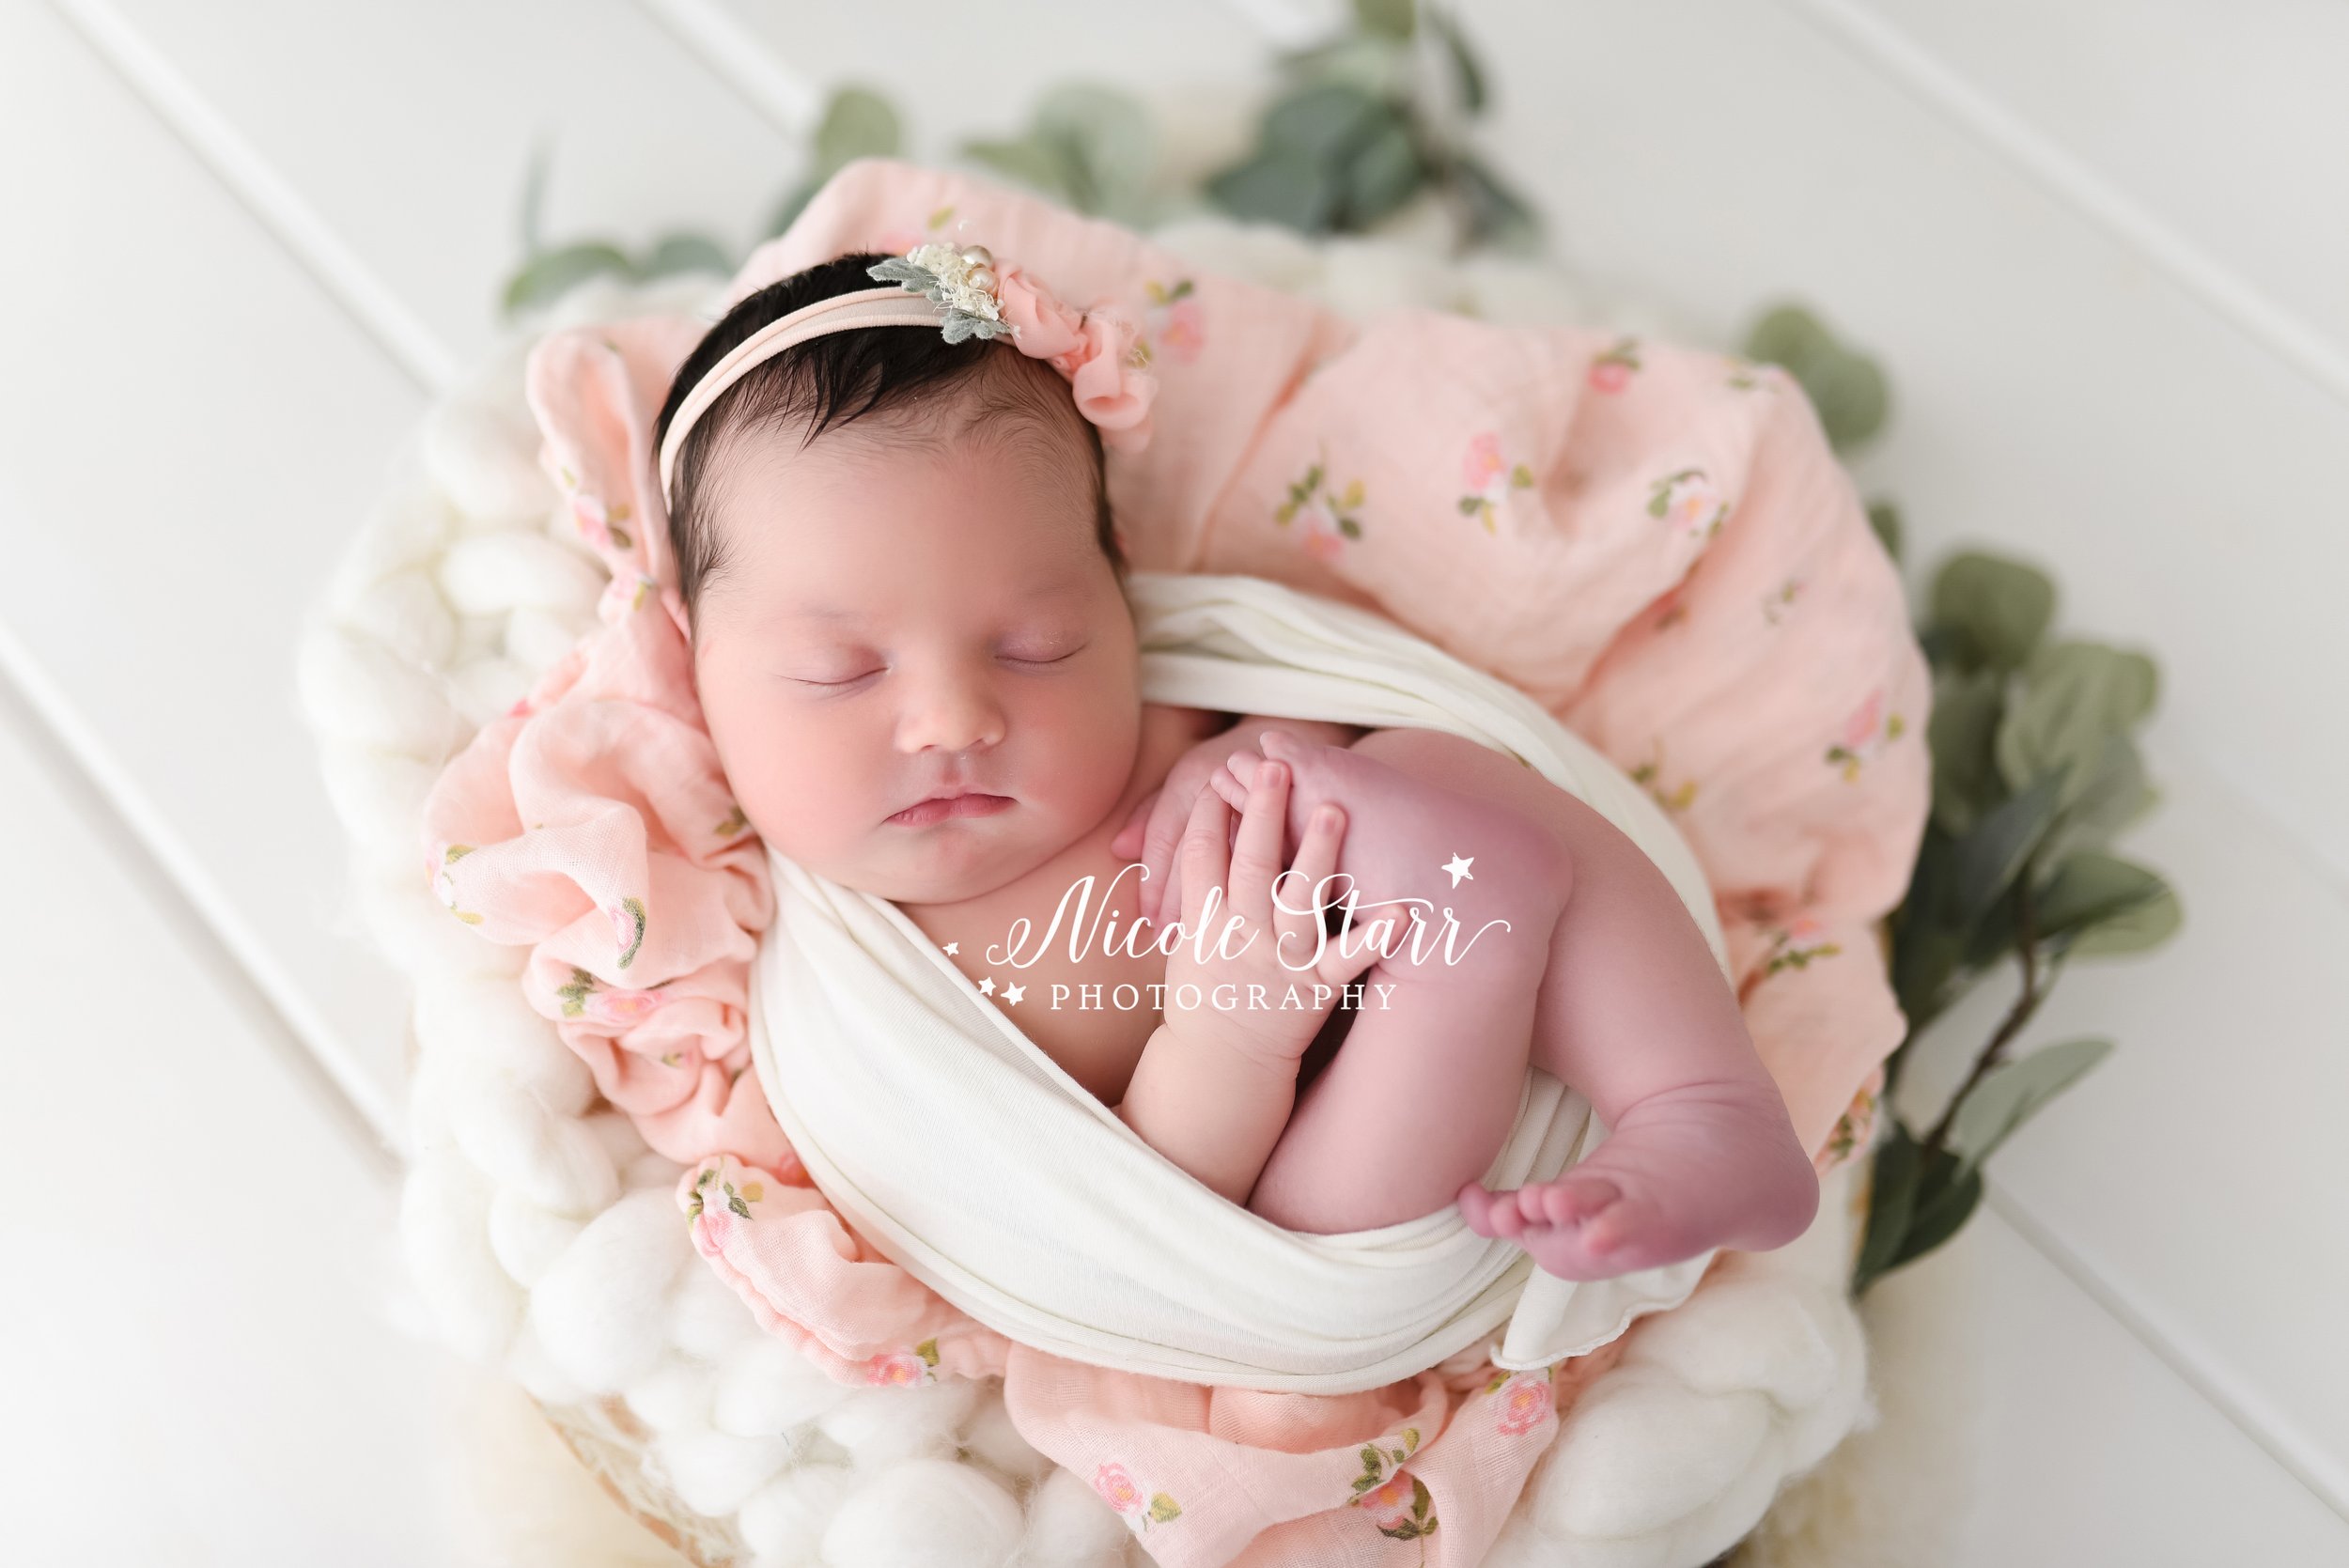 Newborn Photo Outfits: How to Add Variety to Your Gallery Easily